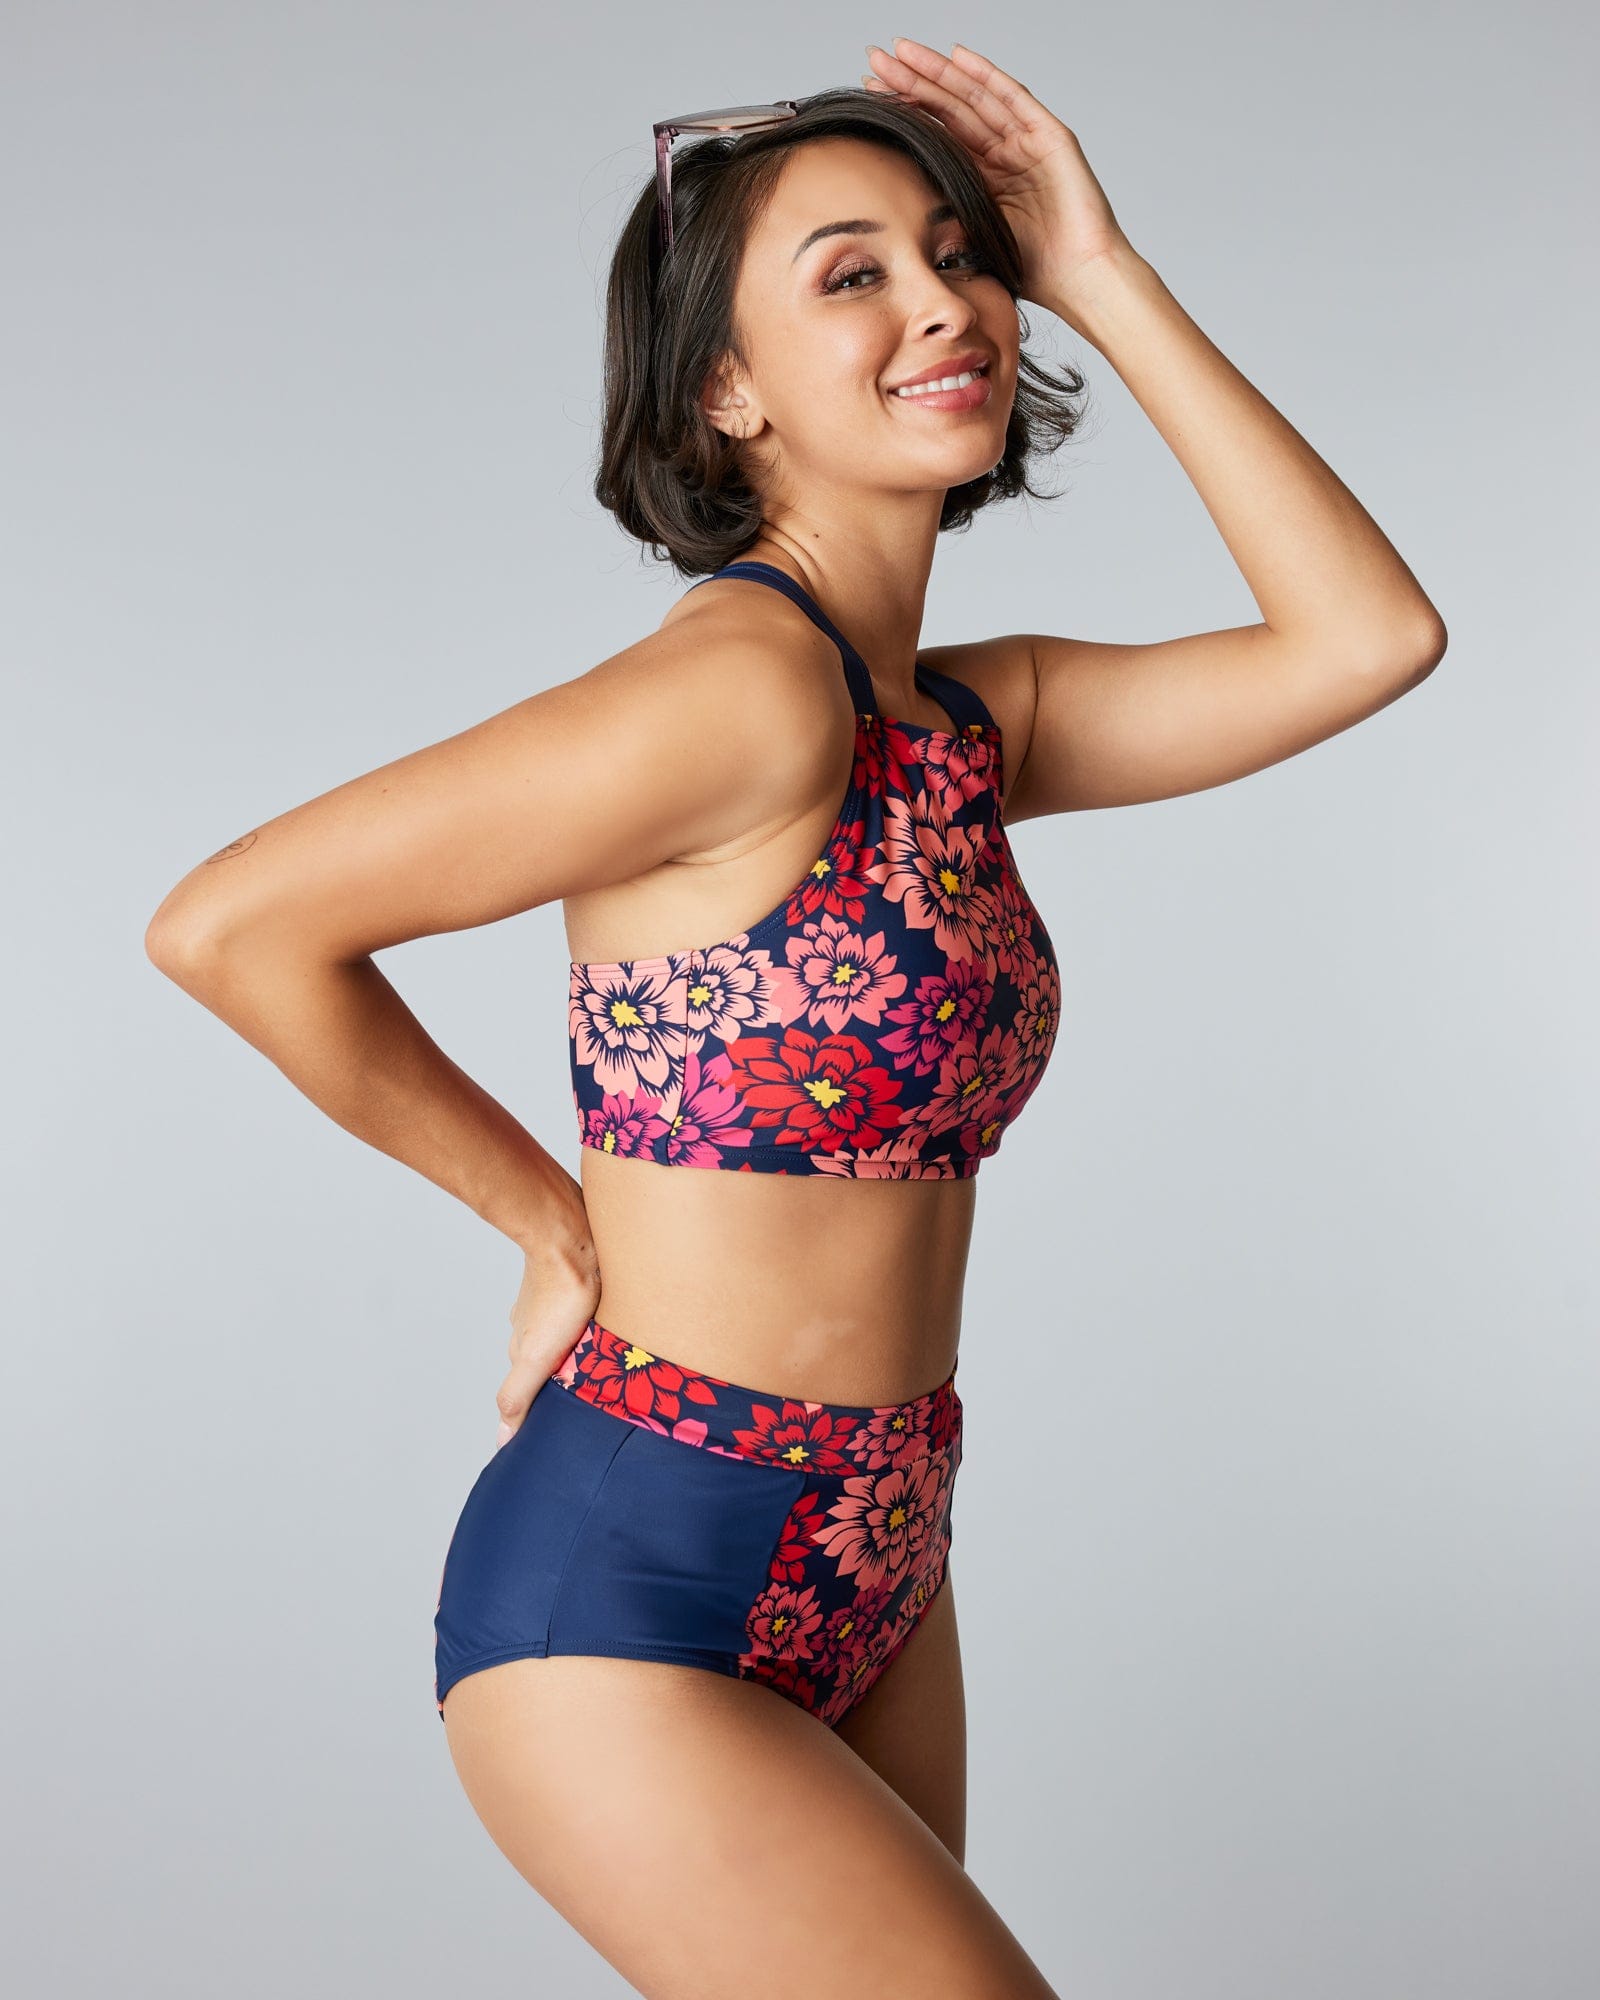 Woman in a two-piece swimsuit with pink flowers on the top and bottom.